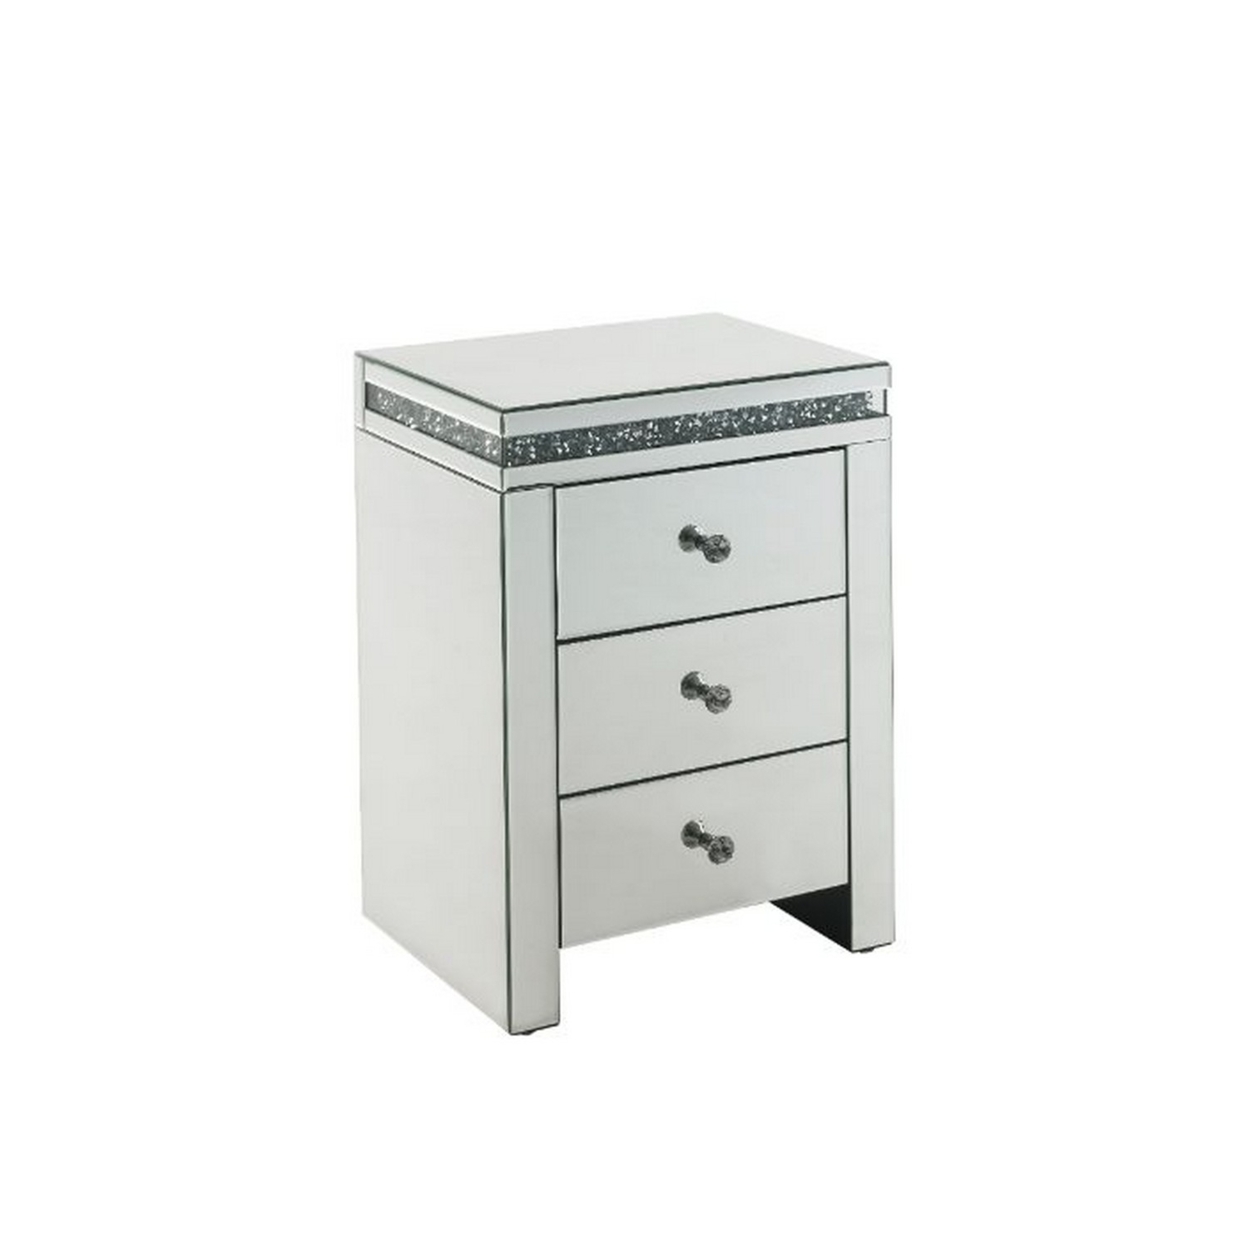 Accent Table With 3 Modern Storage Drawers, White- Saltoro Sherpi